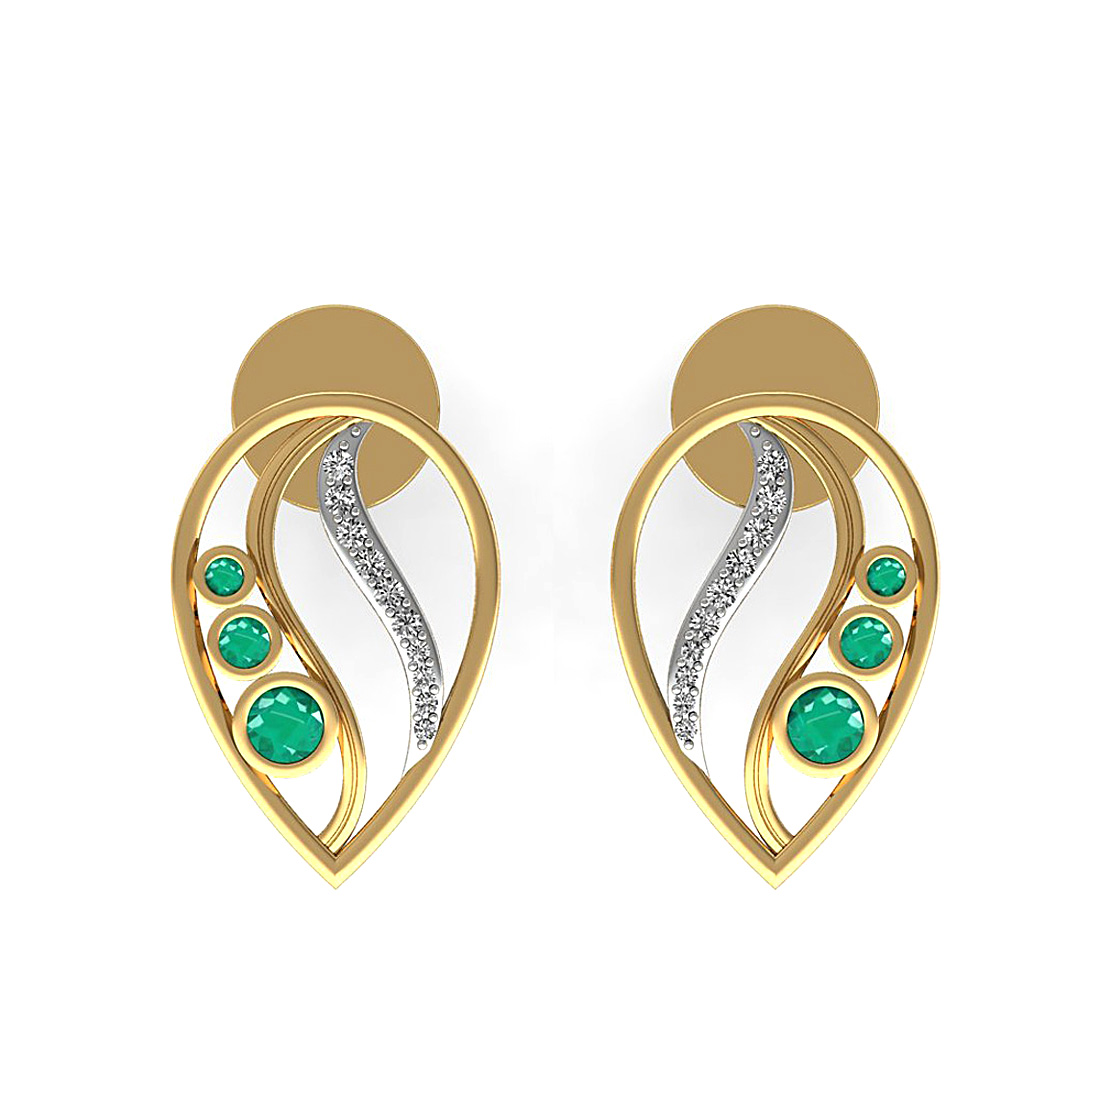 18k solid gold natural diamond stud earrings with emerald